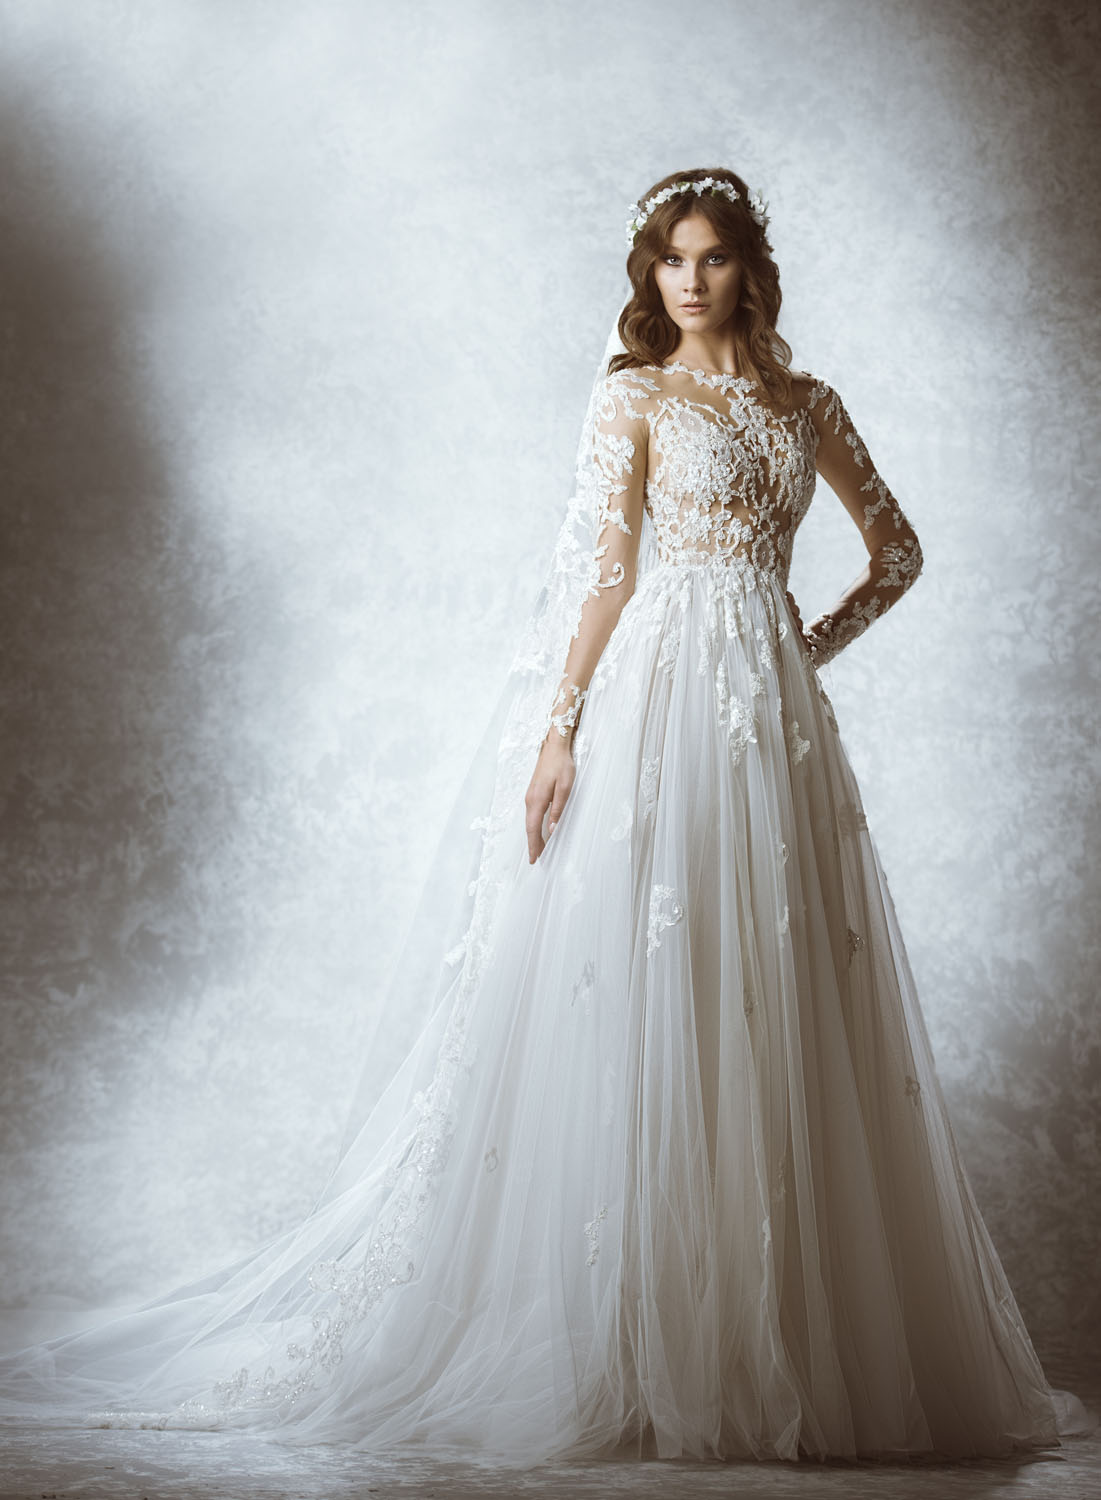 Zuhair Murad Wedding Gown Prices - Dimitra&-39-s Bridal ...